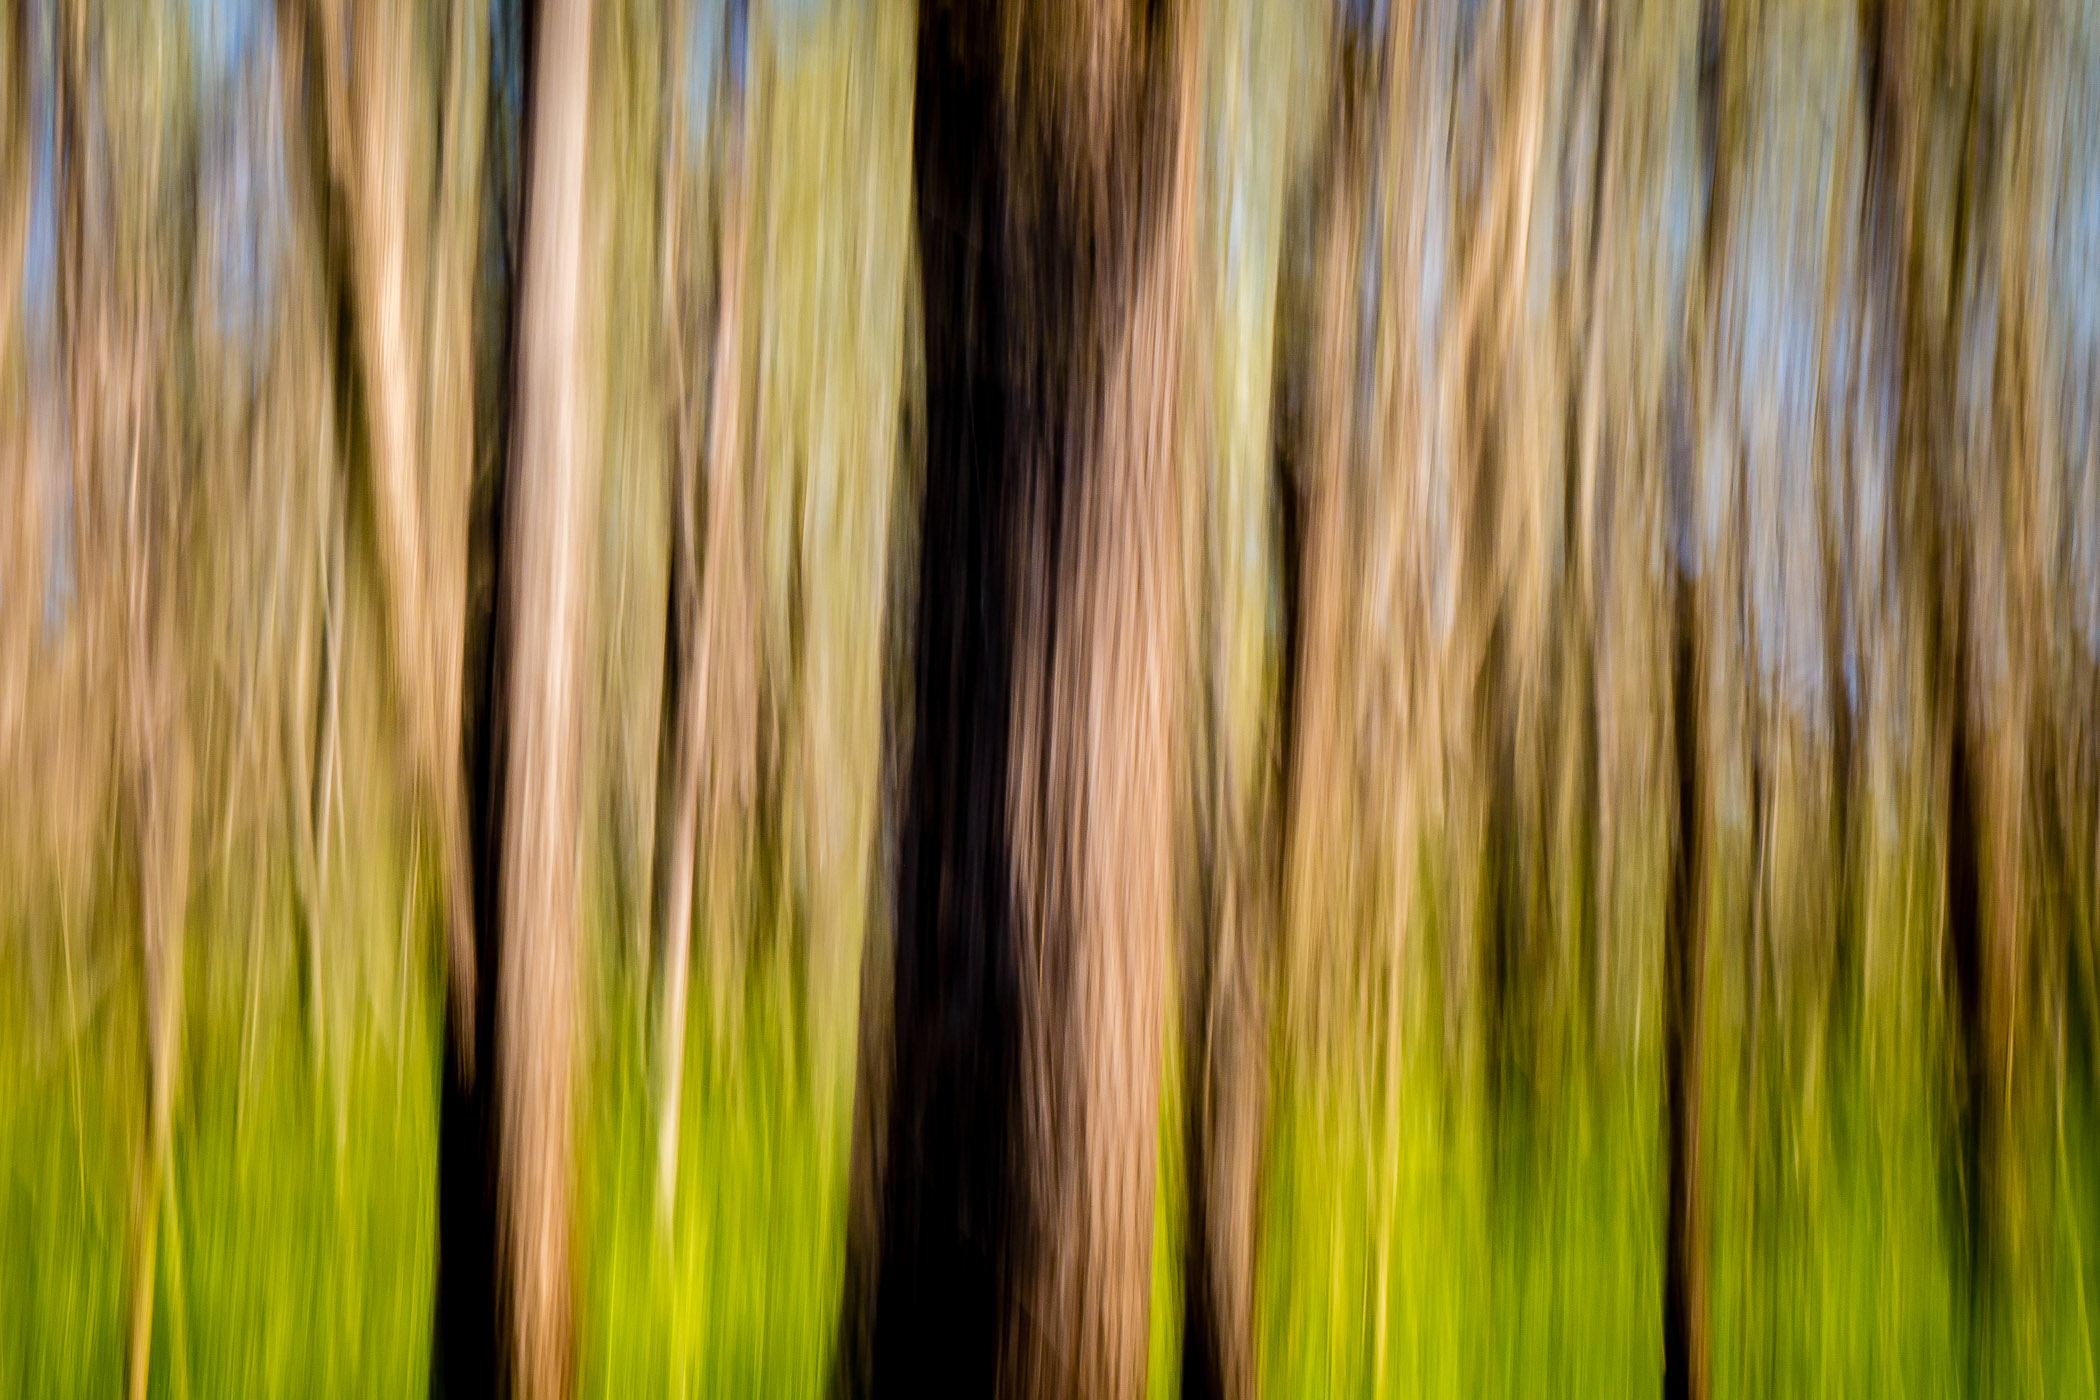 An abstraction of trees in Dallas' Great Trinity Forest.